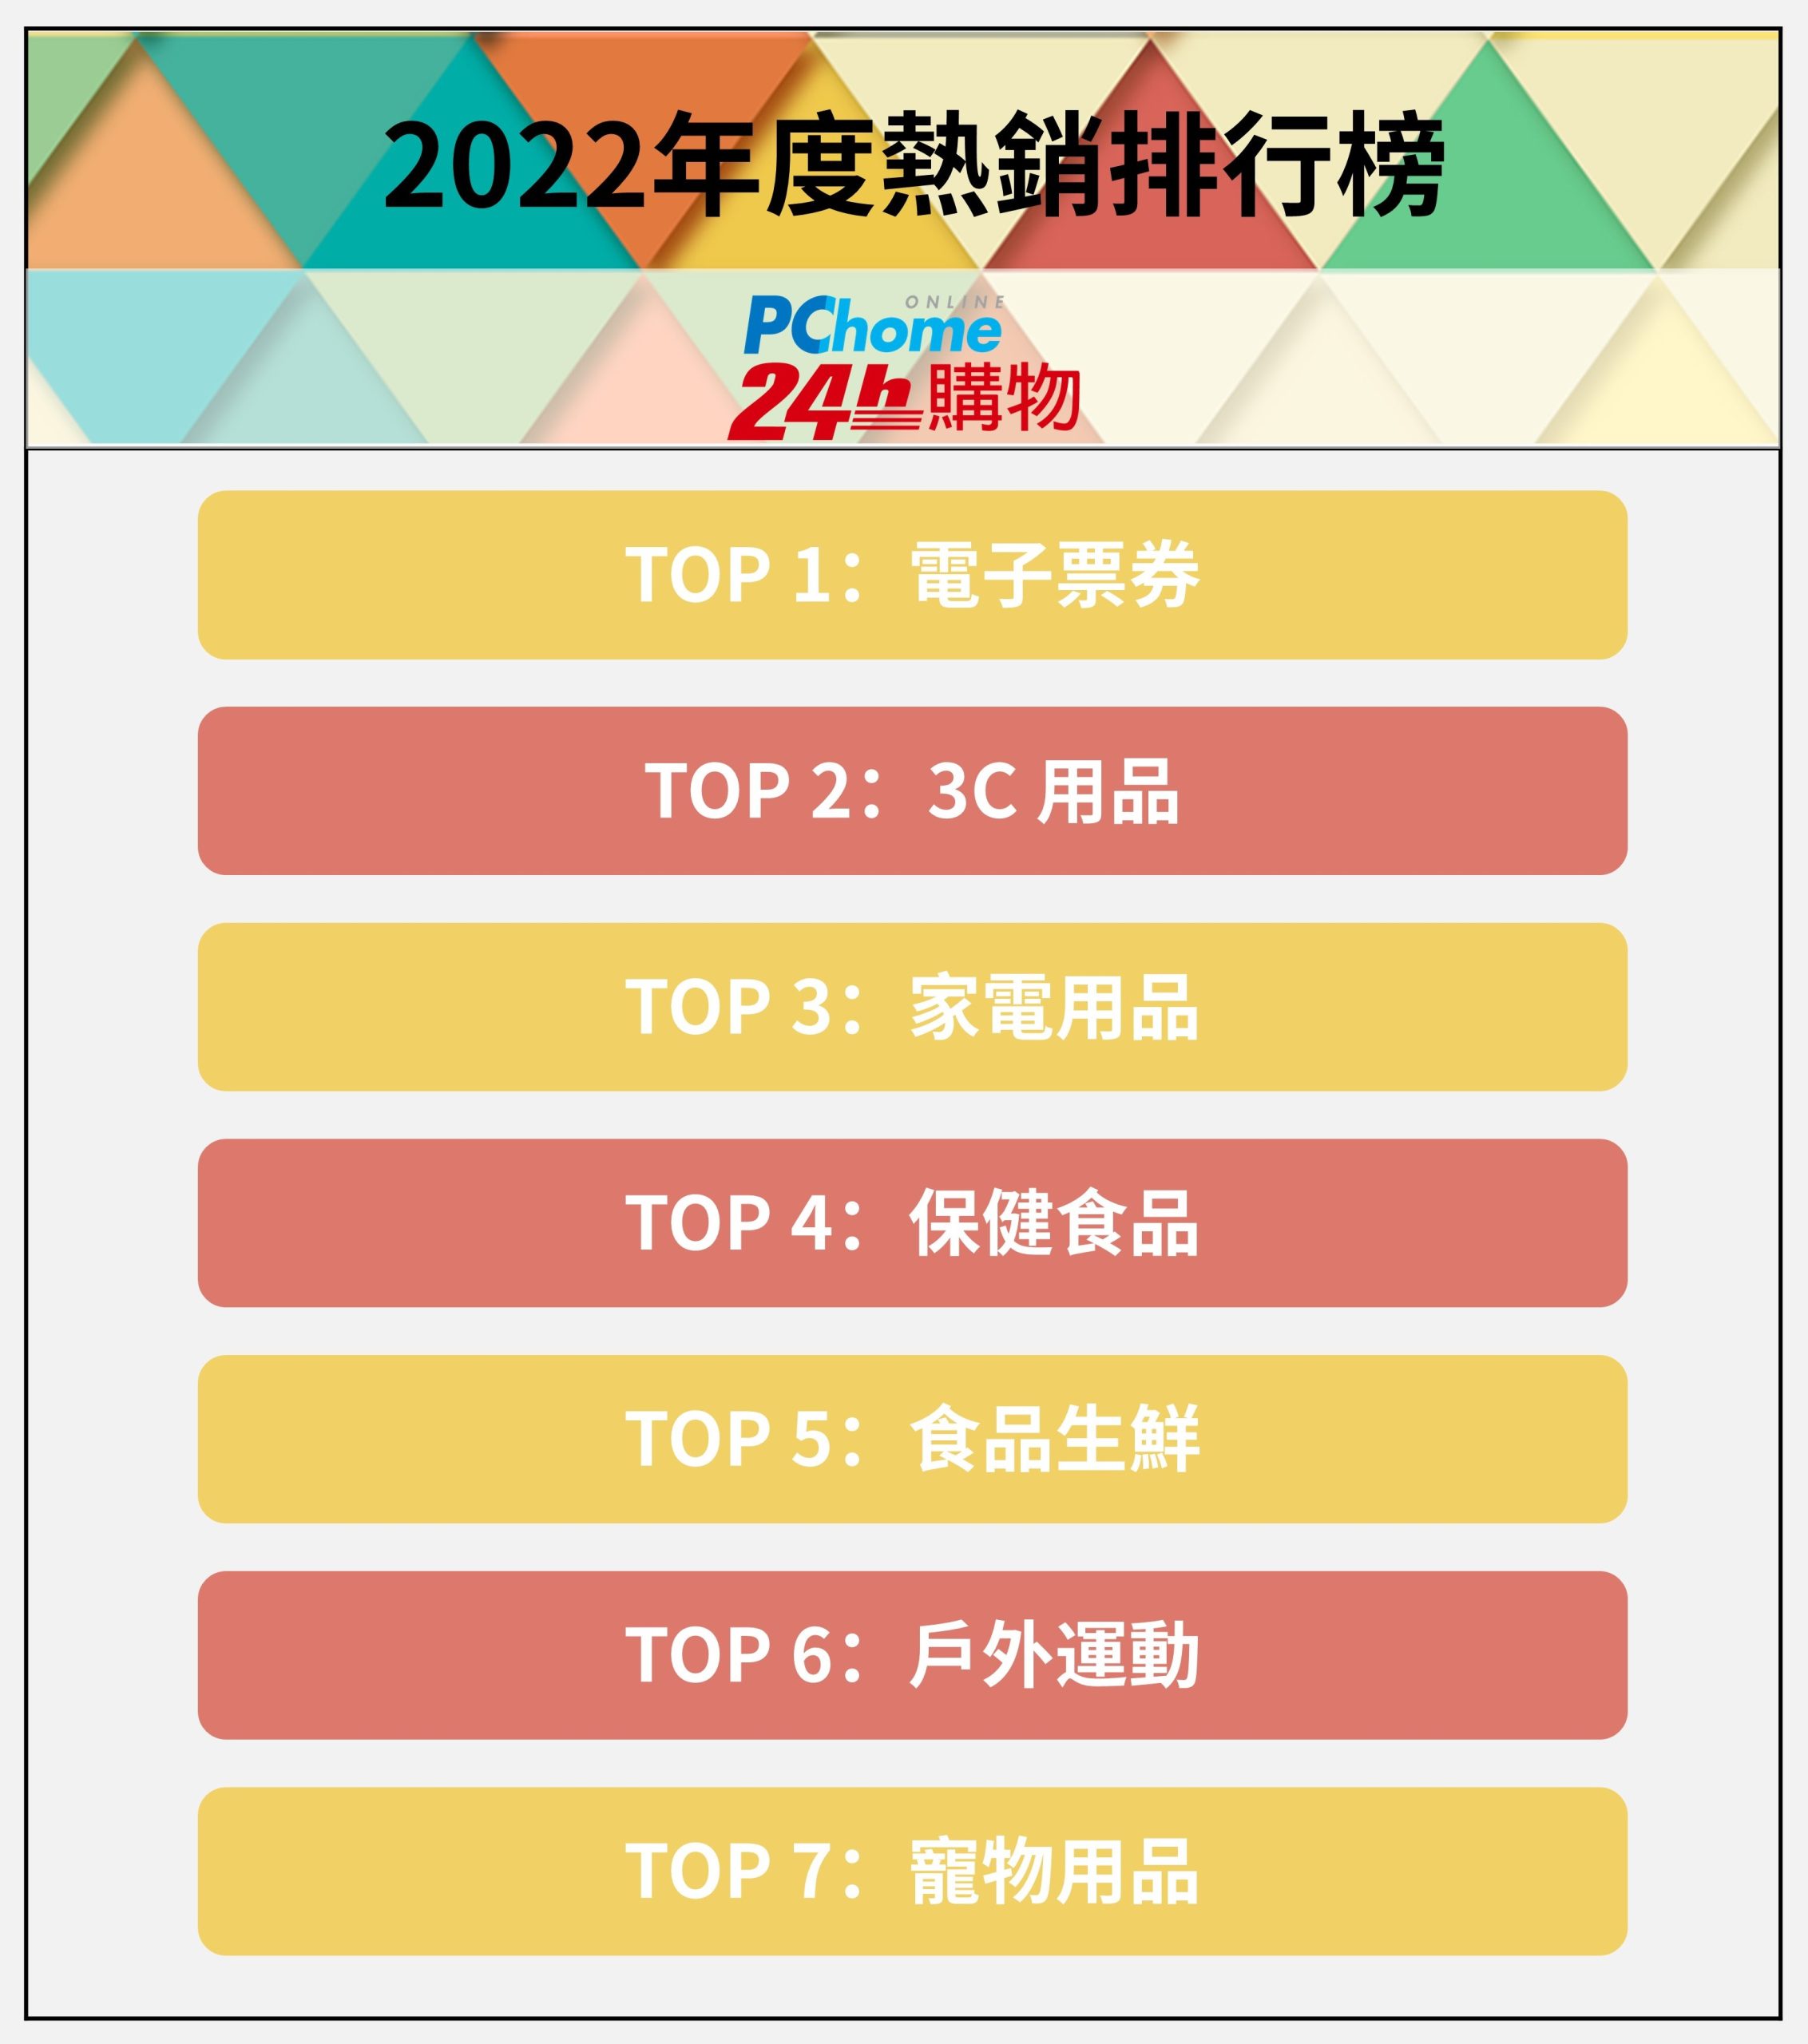 PChome 24h Shopping Analyses Seven Best-Selling Categories and Three Key Consumption Indicators in 2022 Over One Million E-Vouchers Are Sold and the Amount of Toilet Paper Sold Is Equivalent to 1800 Taipei 101 Buildings